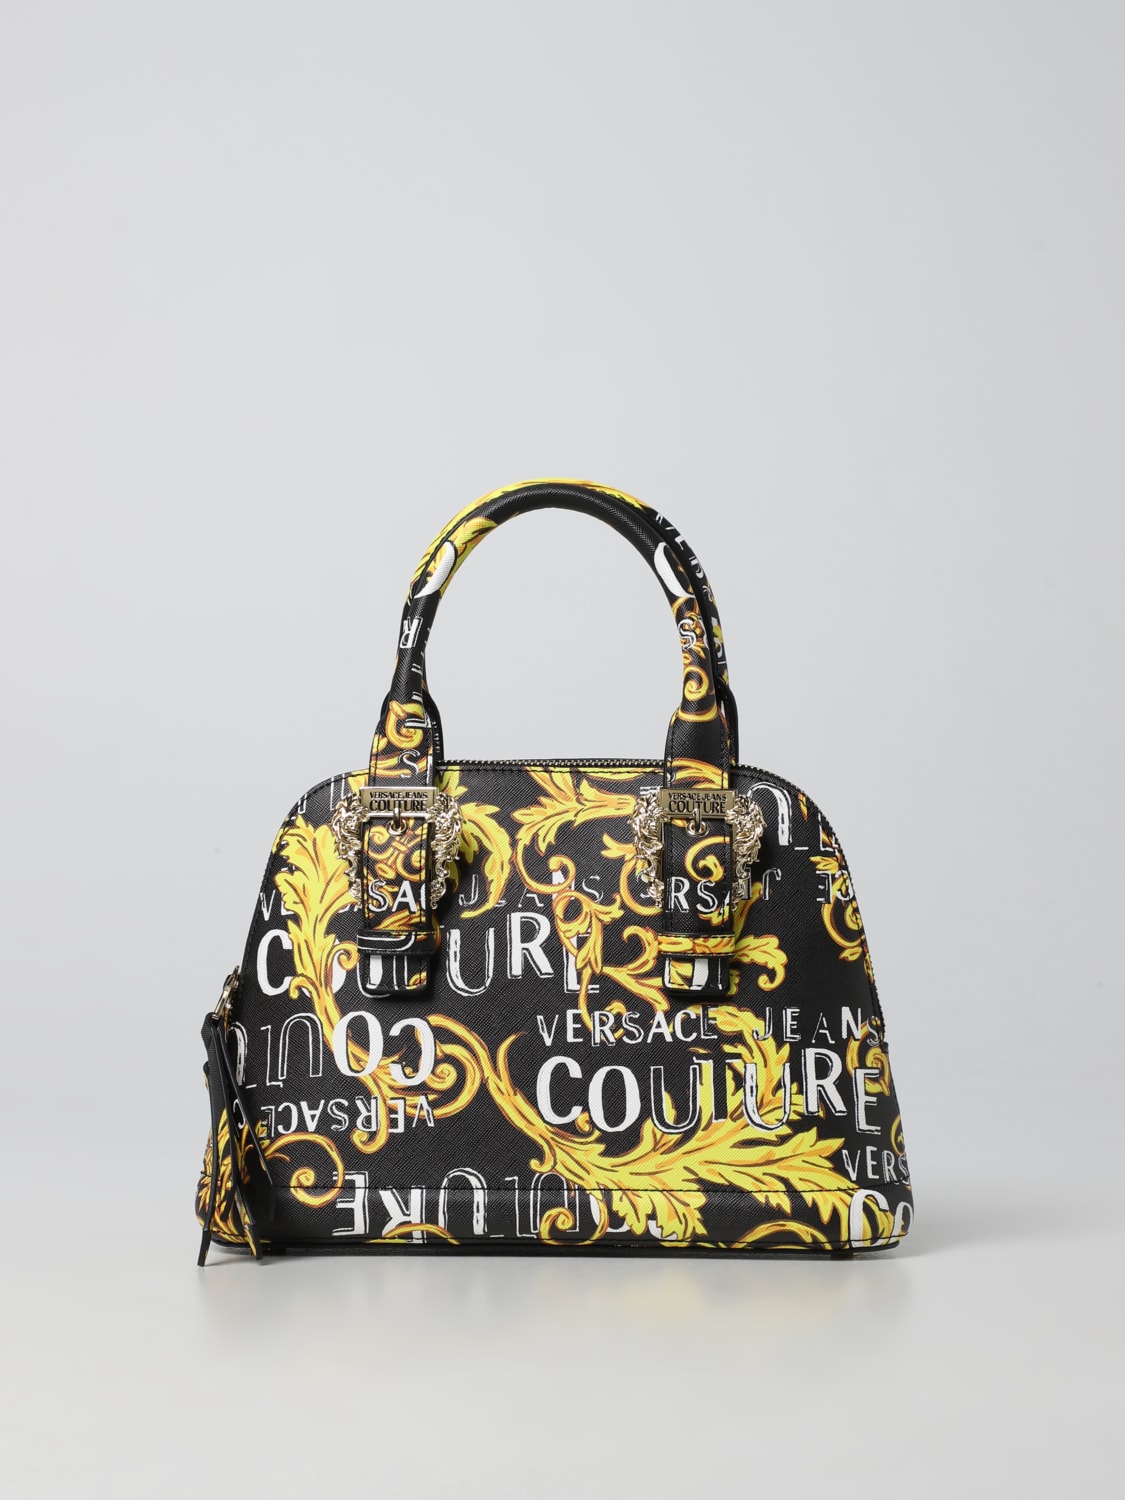 VERSACE JEANS COUTURE ハンドバッグ ブラック www.krzysztofbialy.com